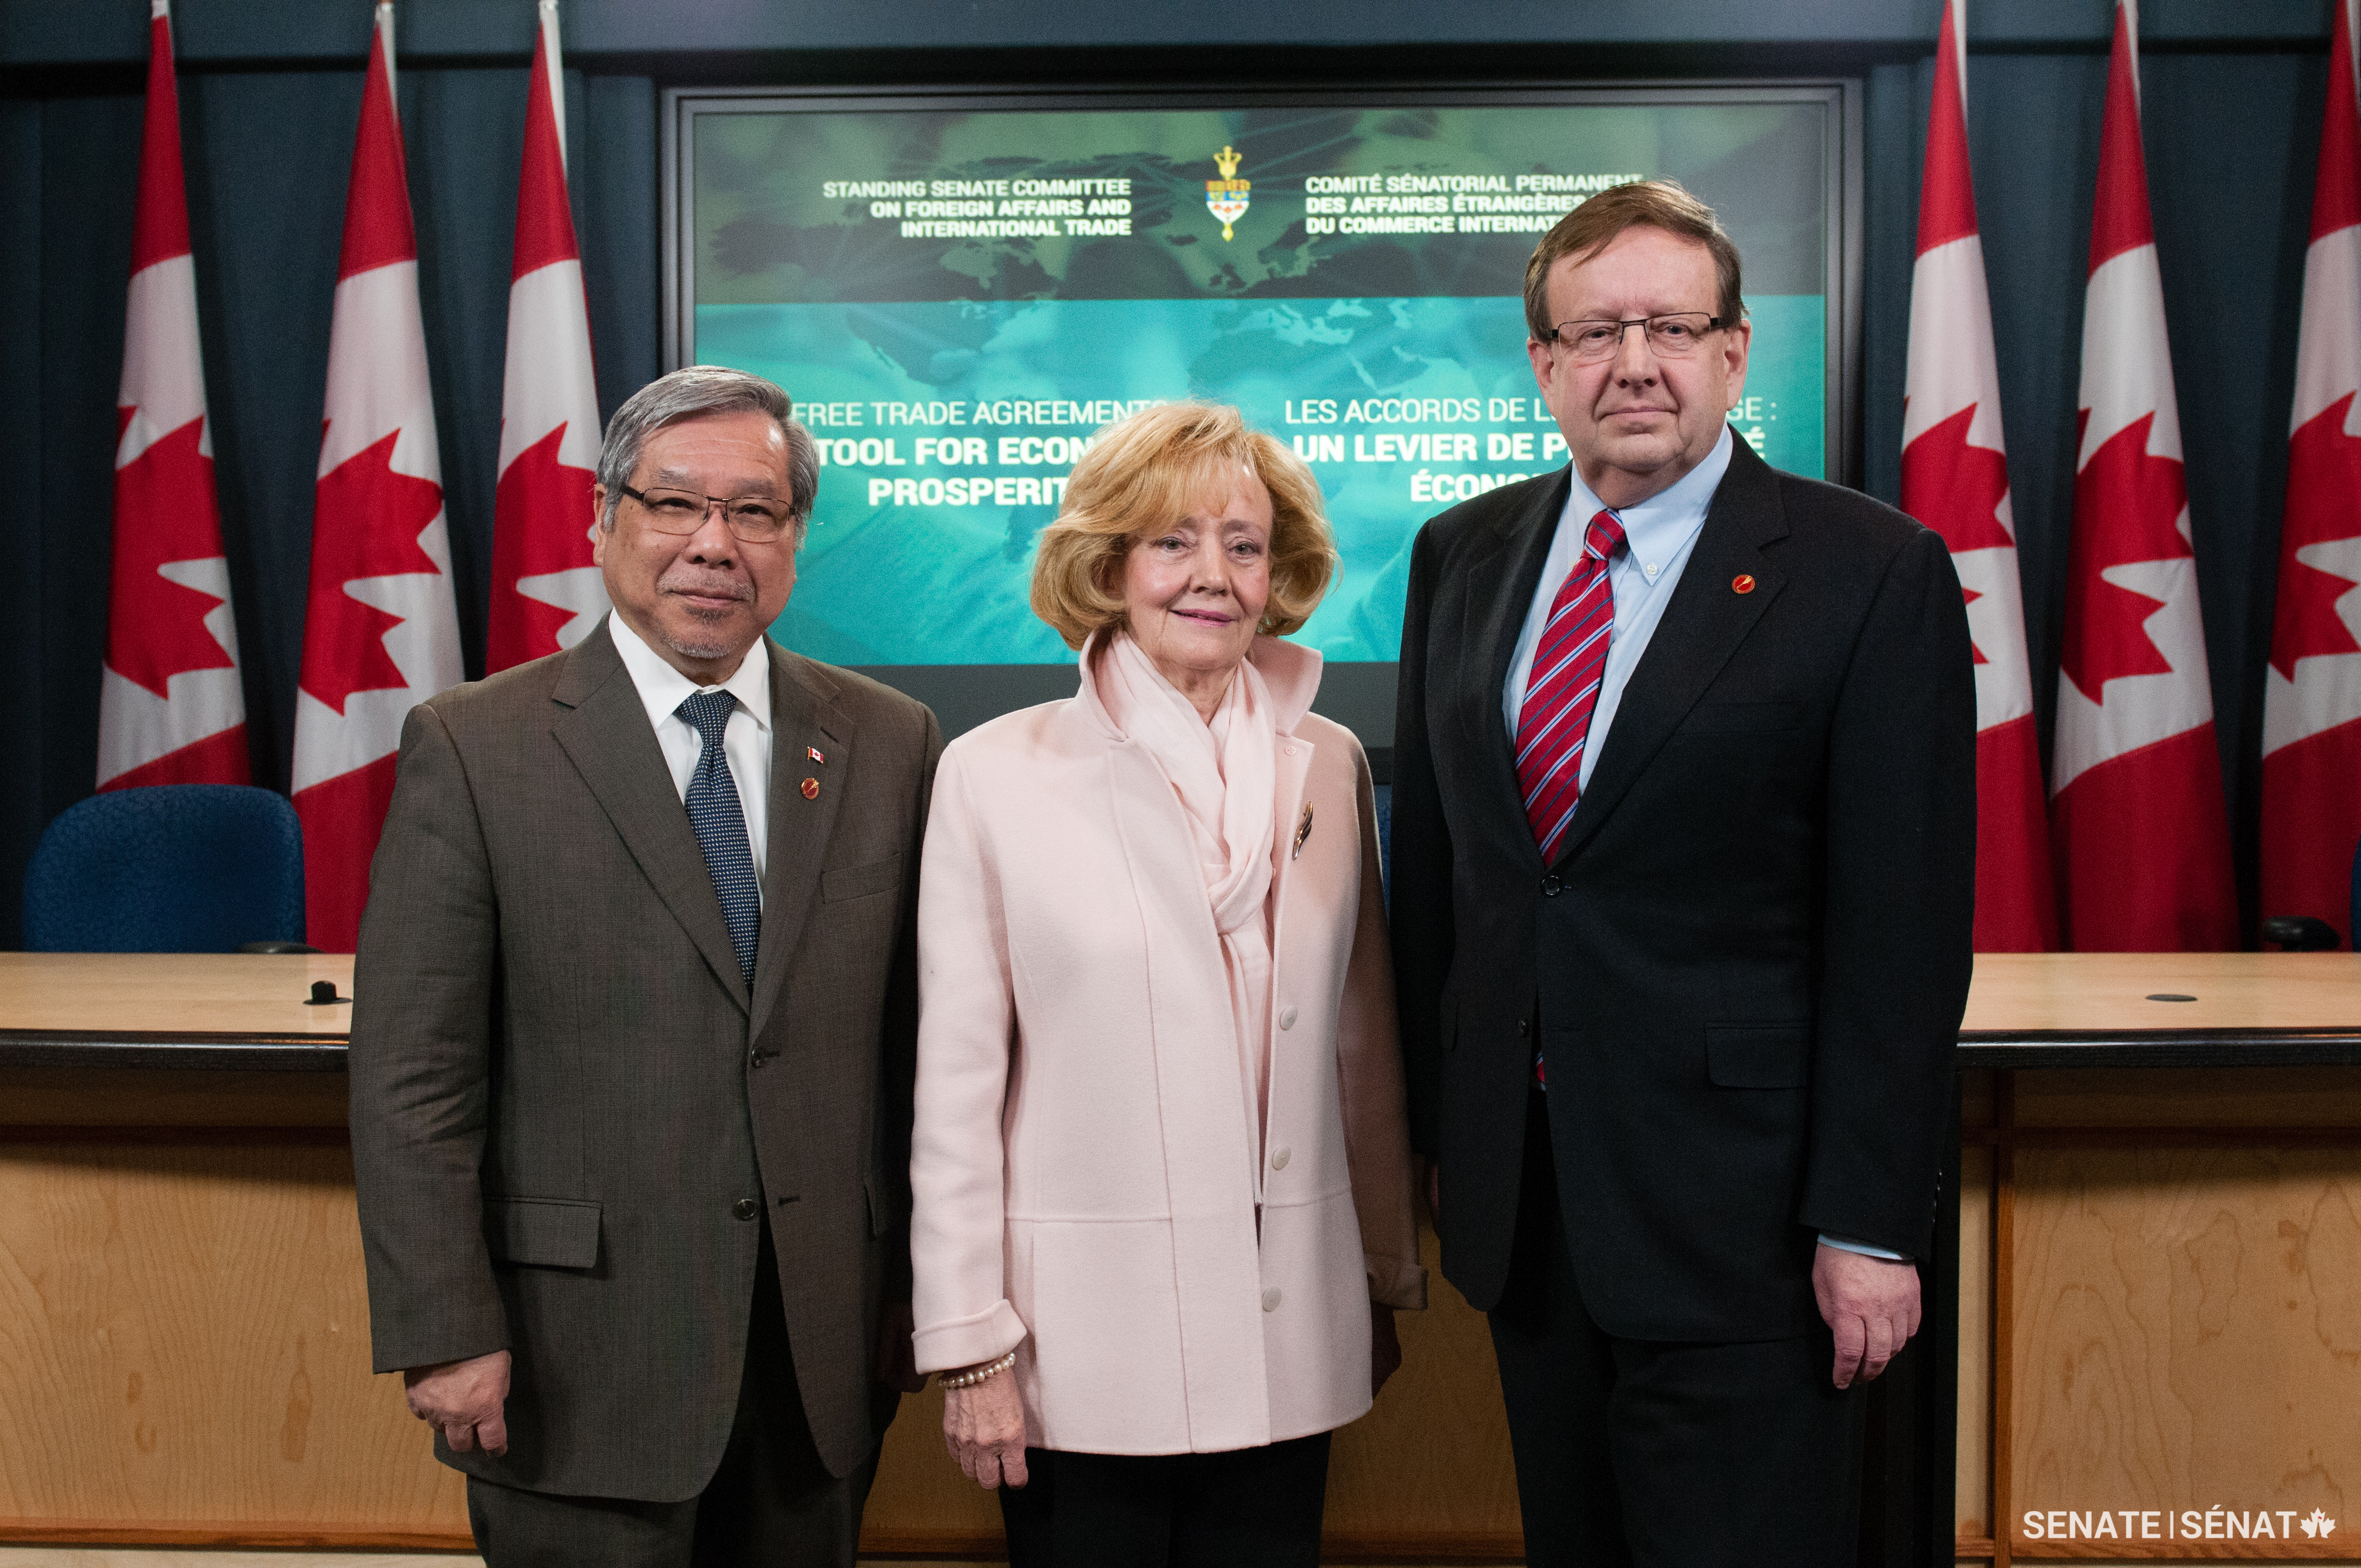 Senators Thanh Hai Ngo, Raynell Andreychuk and Percy Downe present a report calling on the government to increase public awareness and parliamentary oversight of international free trade agreements.